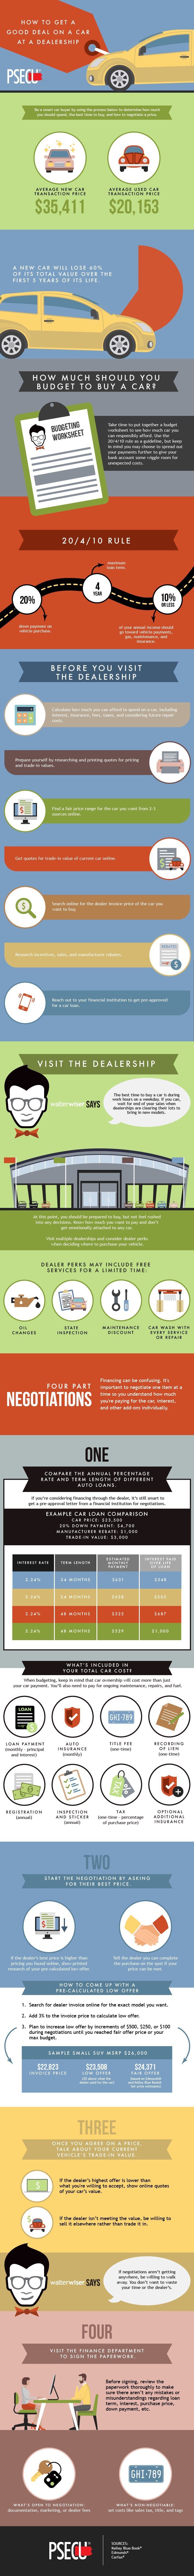 How to get a good deal at a car dealership infographic